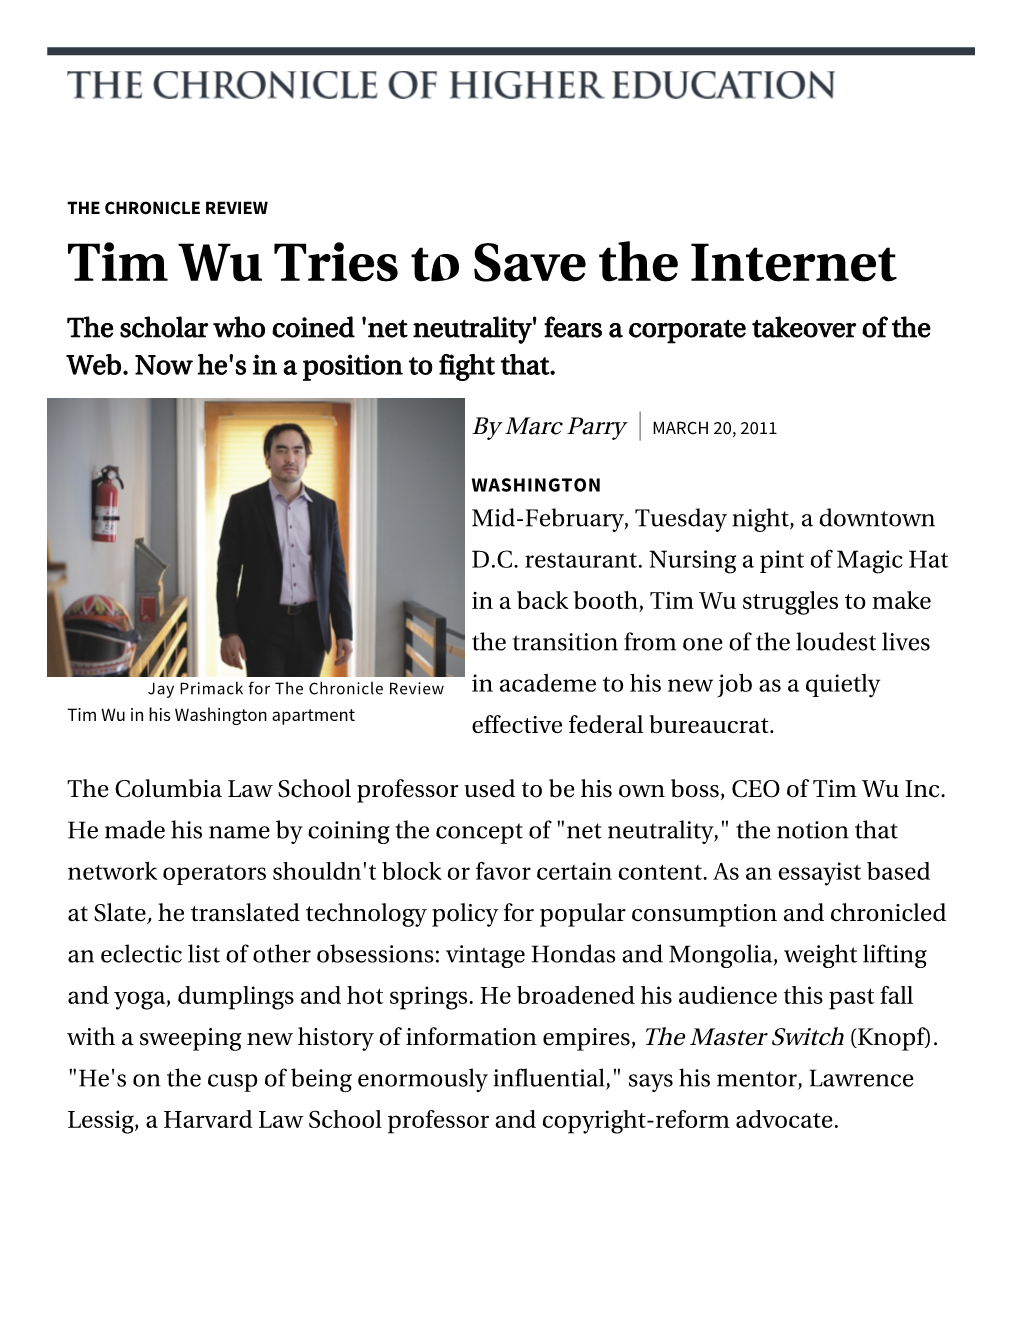 Tim Wu Tries to Save the Internet the Scholar Who Coined 'Net Neutrality' Fears a Corporate Takeover of the Web